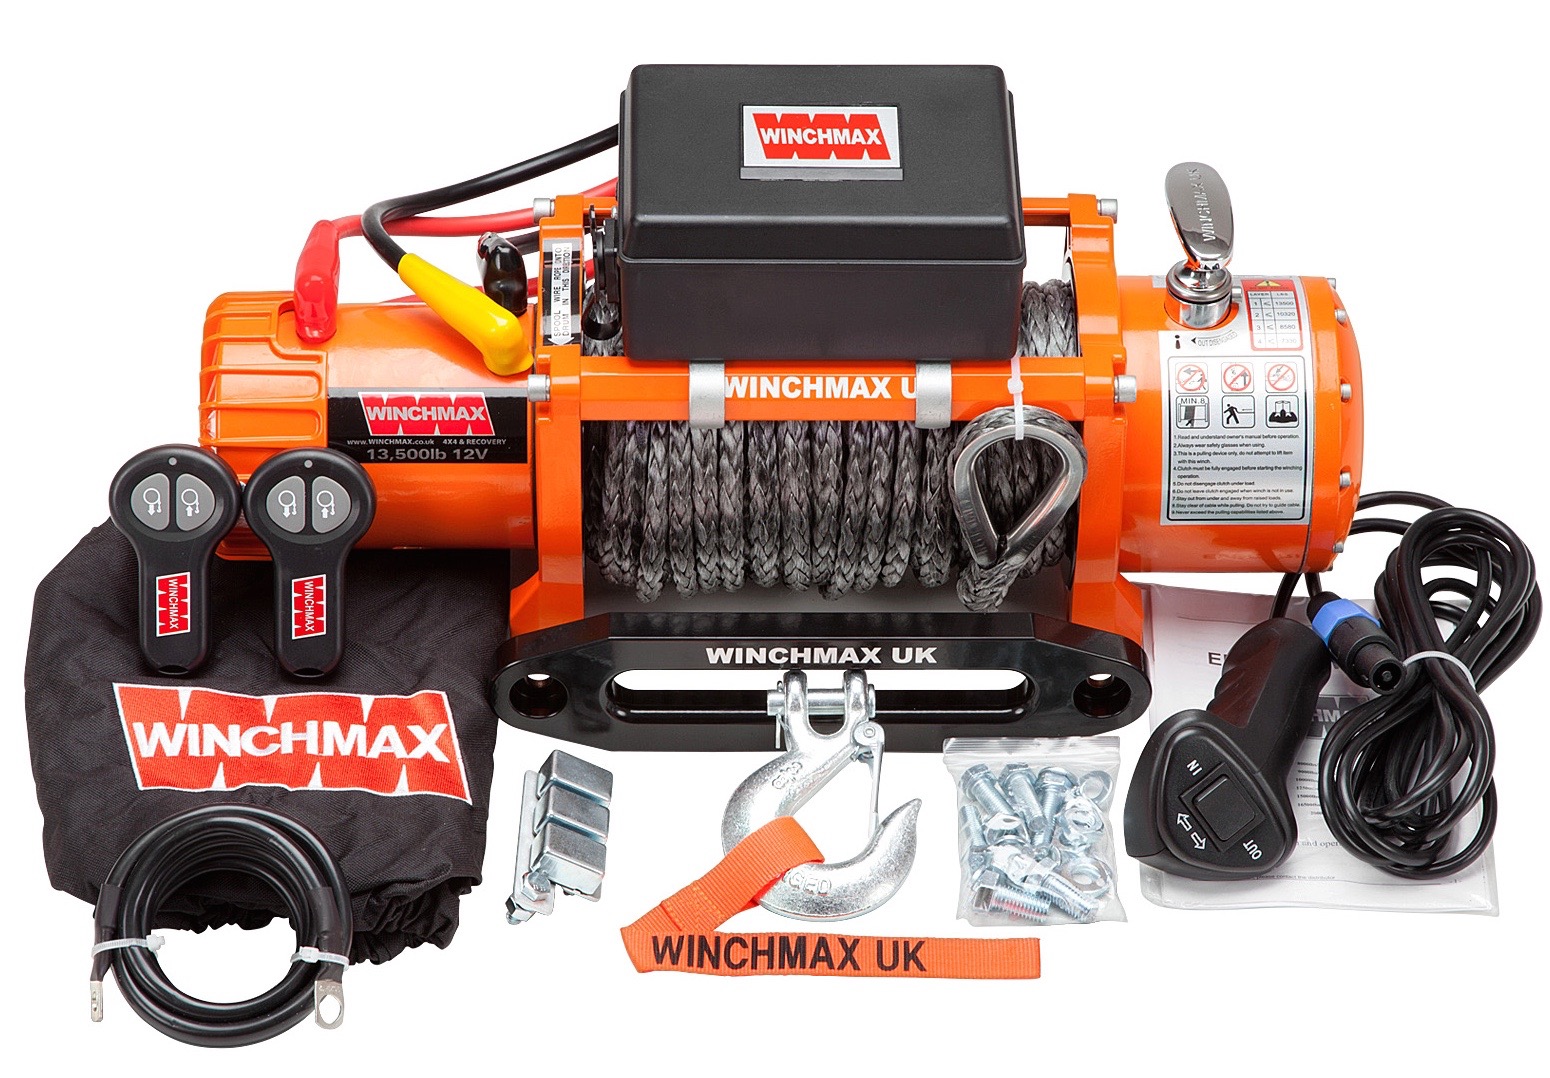 product_view.php?pid=WINCHMAX 13500LB 24V DYNEEMA ROPE RECOVERY WINCH 